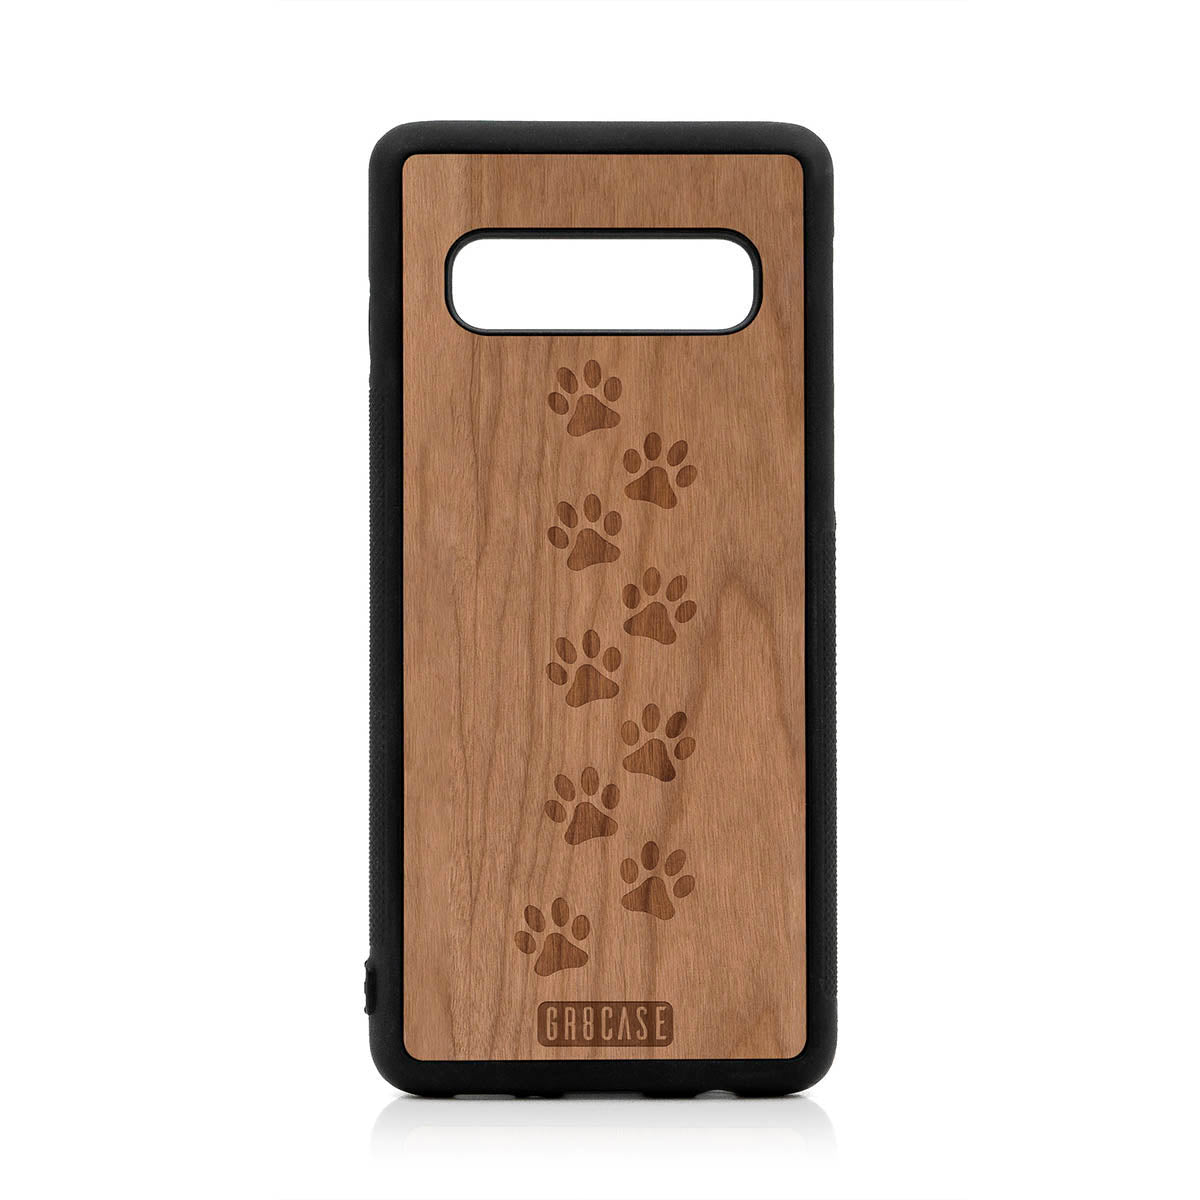 Paw Prints Design Wood Case For Samsung Galaxy S10 by GR8CASE